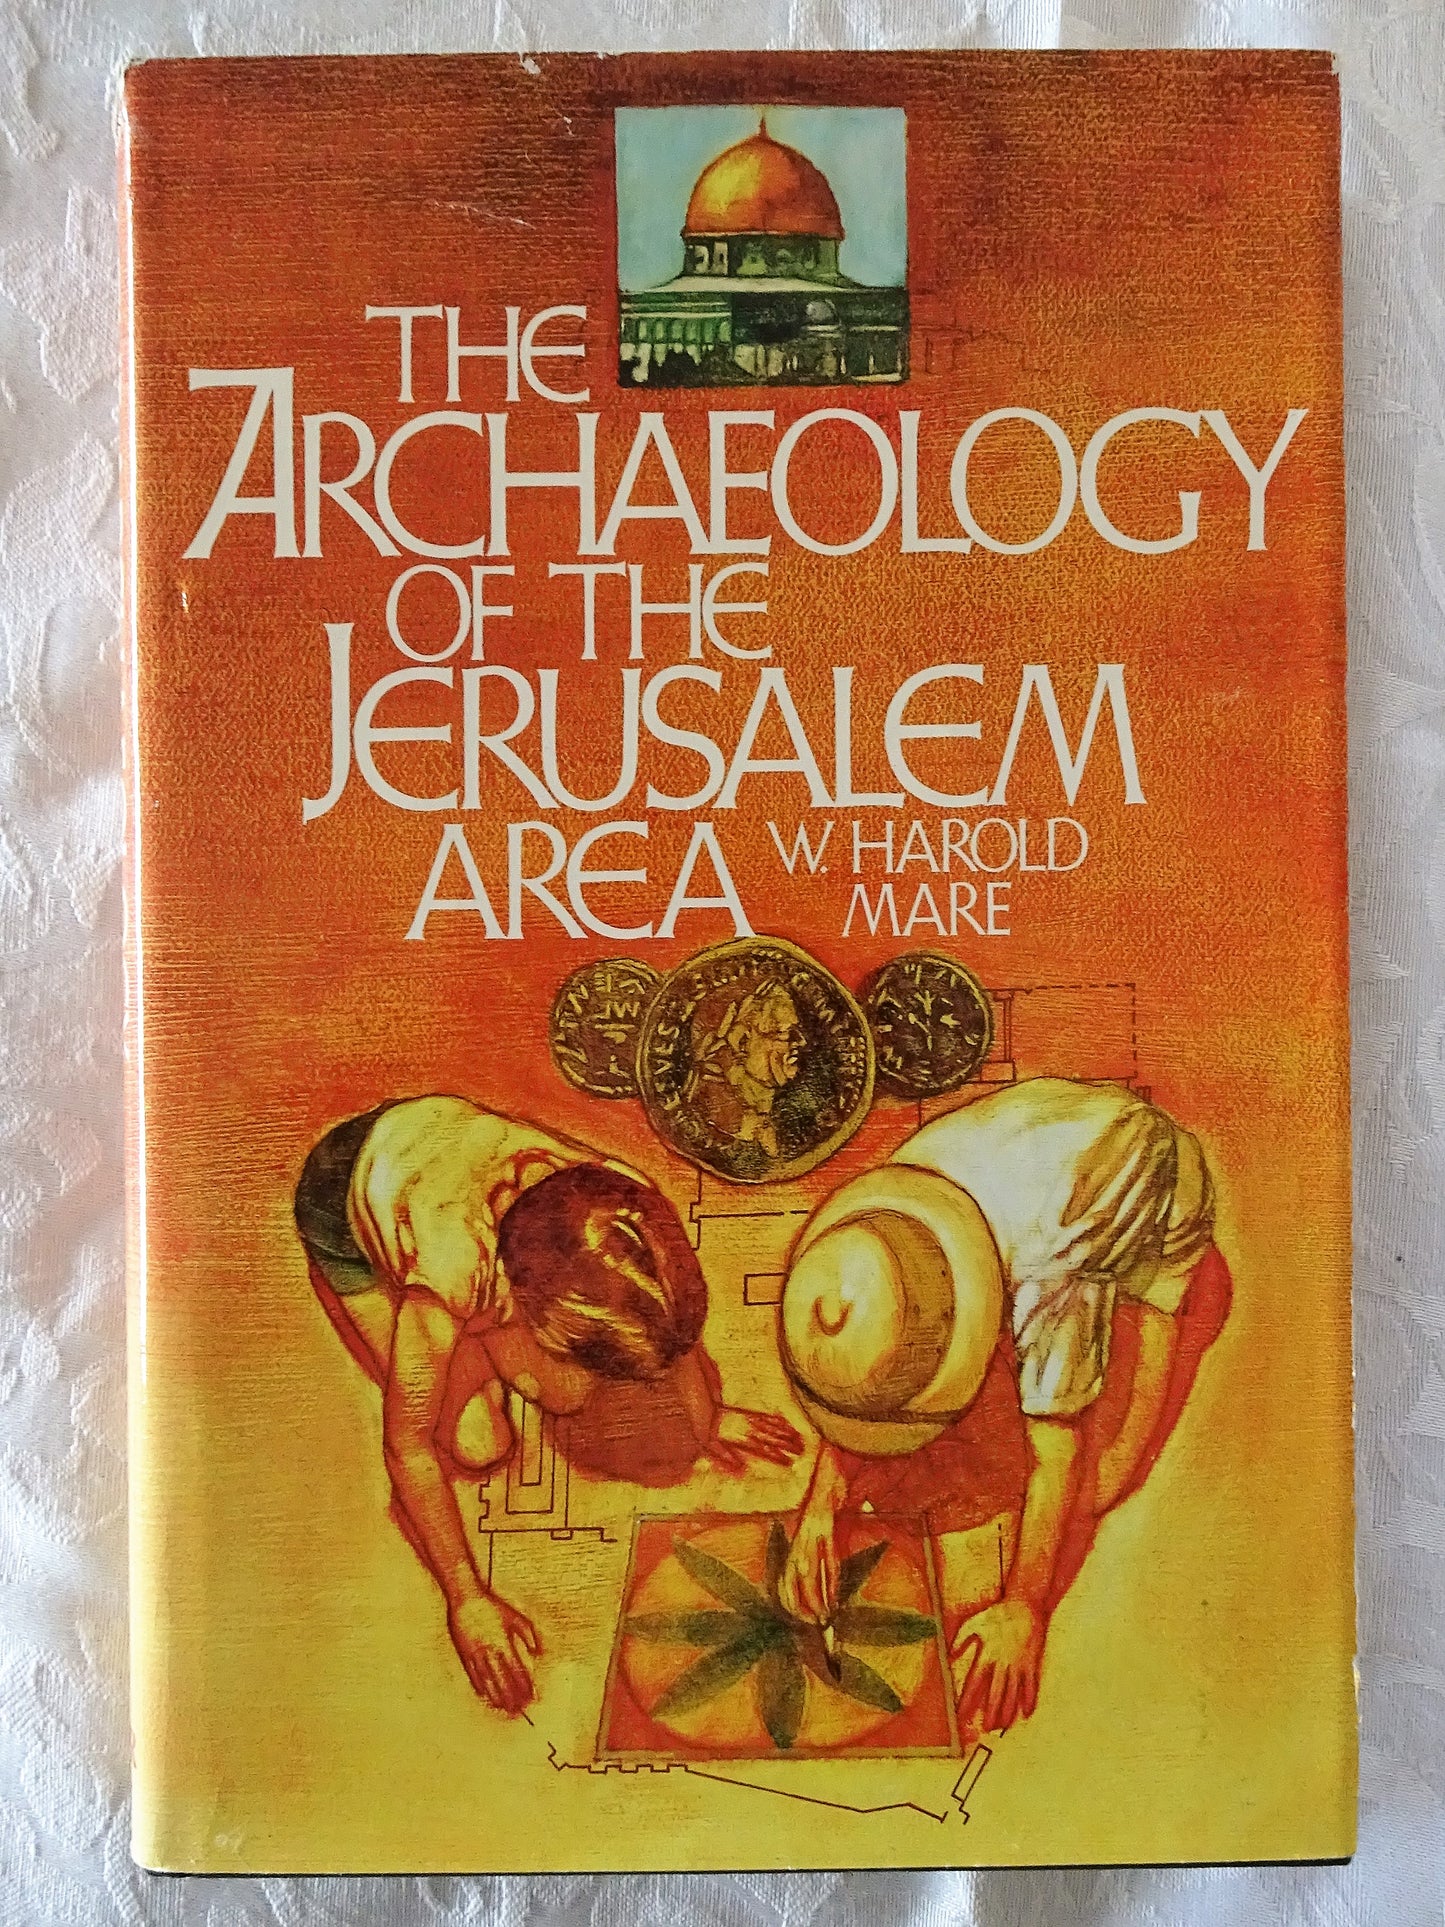 The Archaeology of the Jerusalem Area by W. Harold Mare